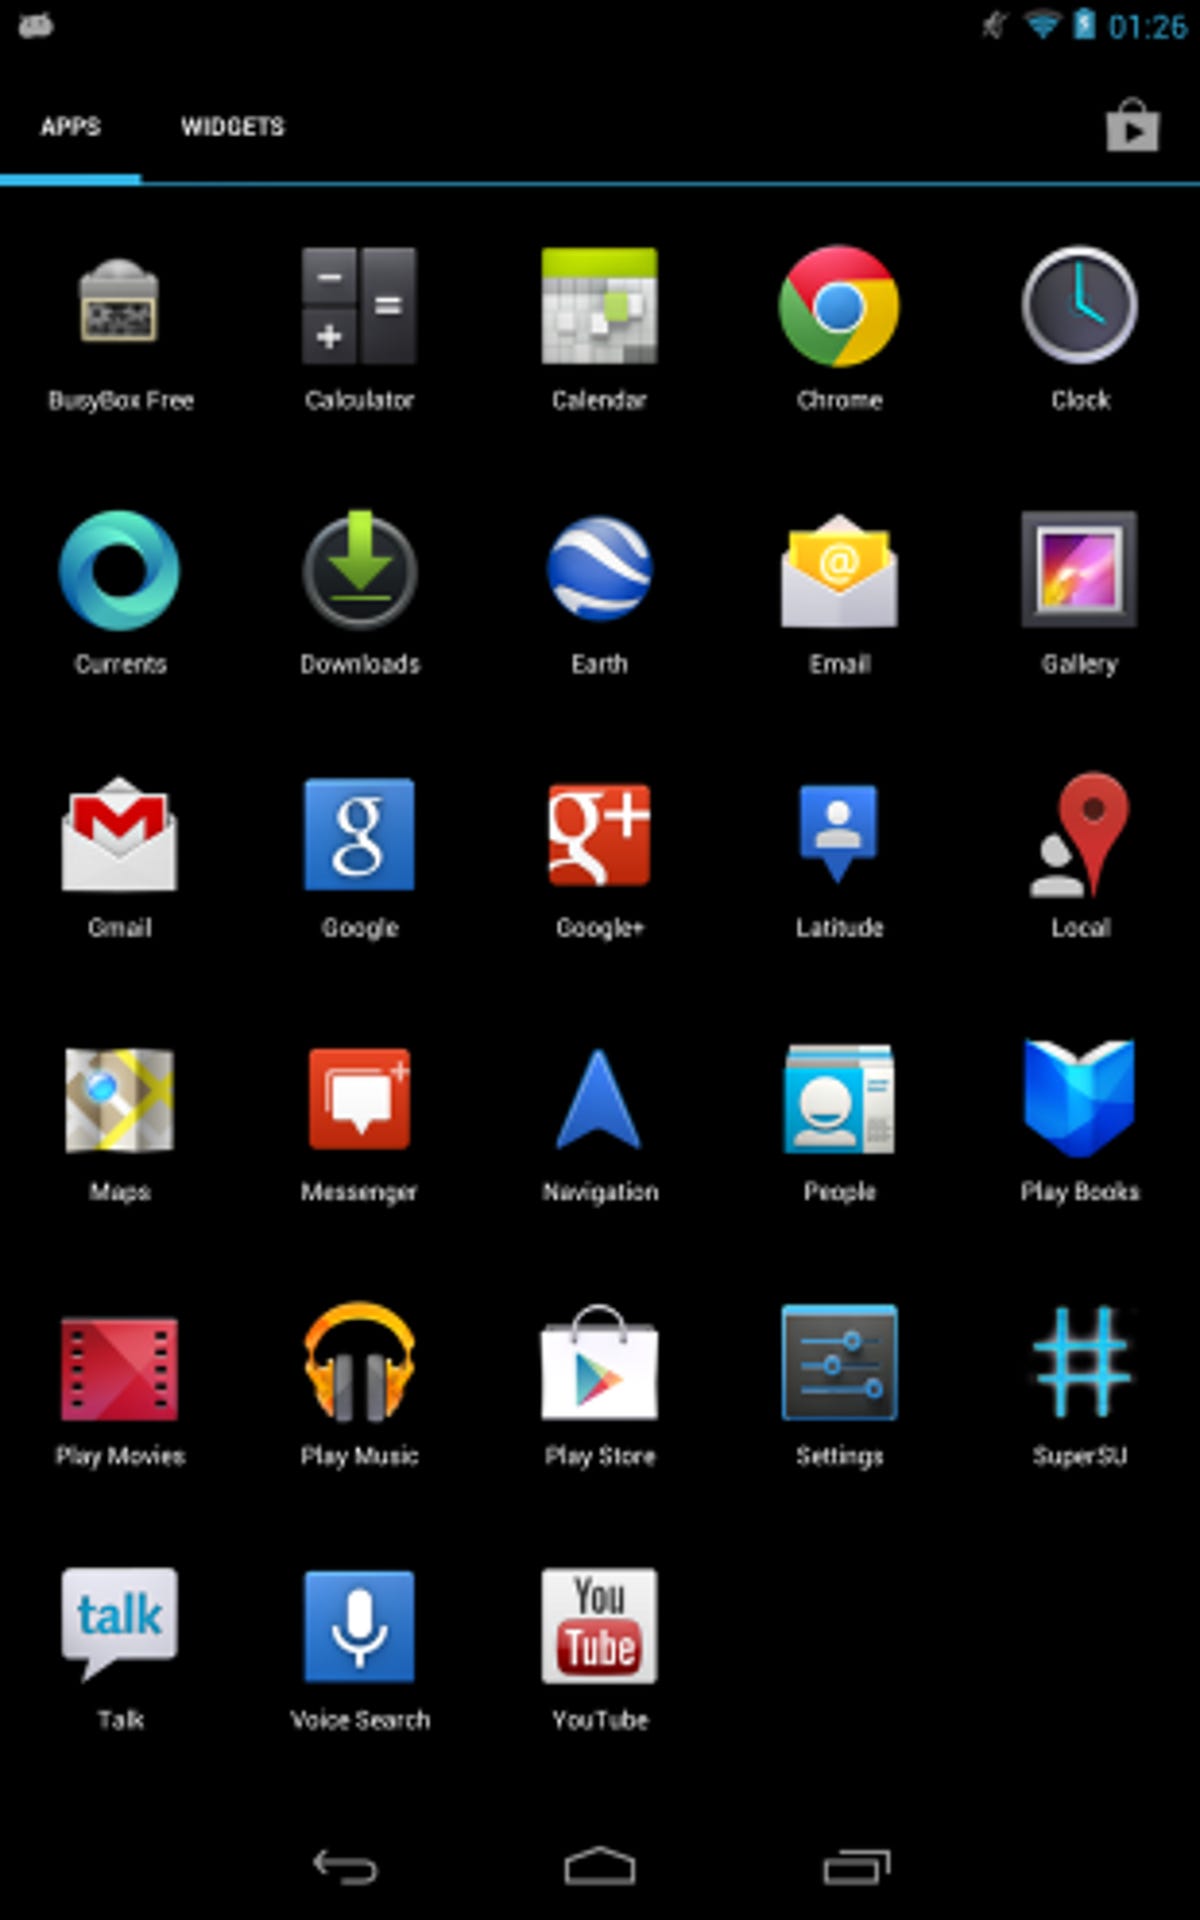 The Nexus 7's app grid as two new additions: Busybox and SuperSU